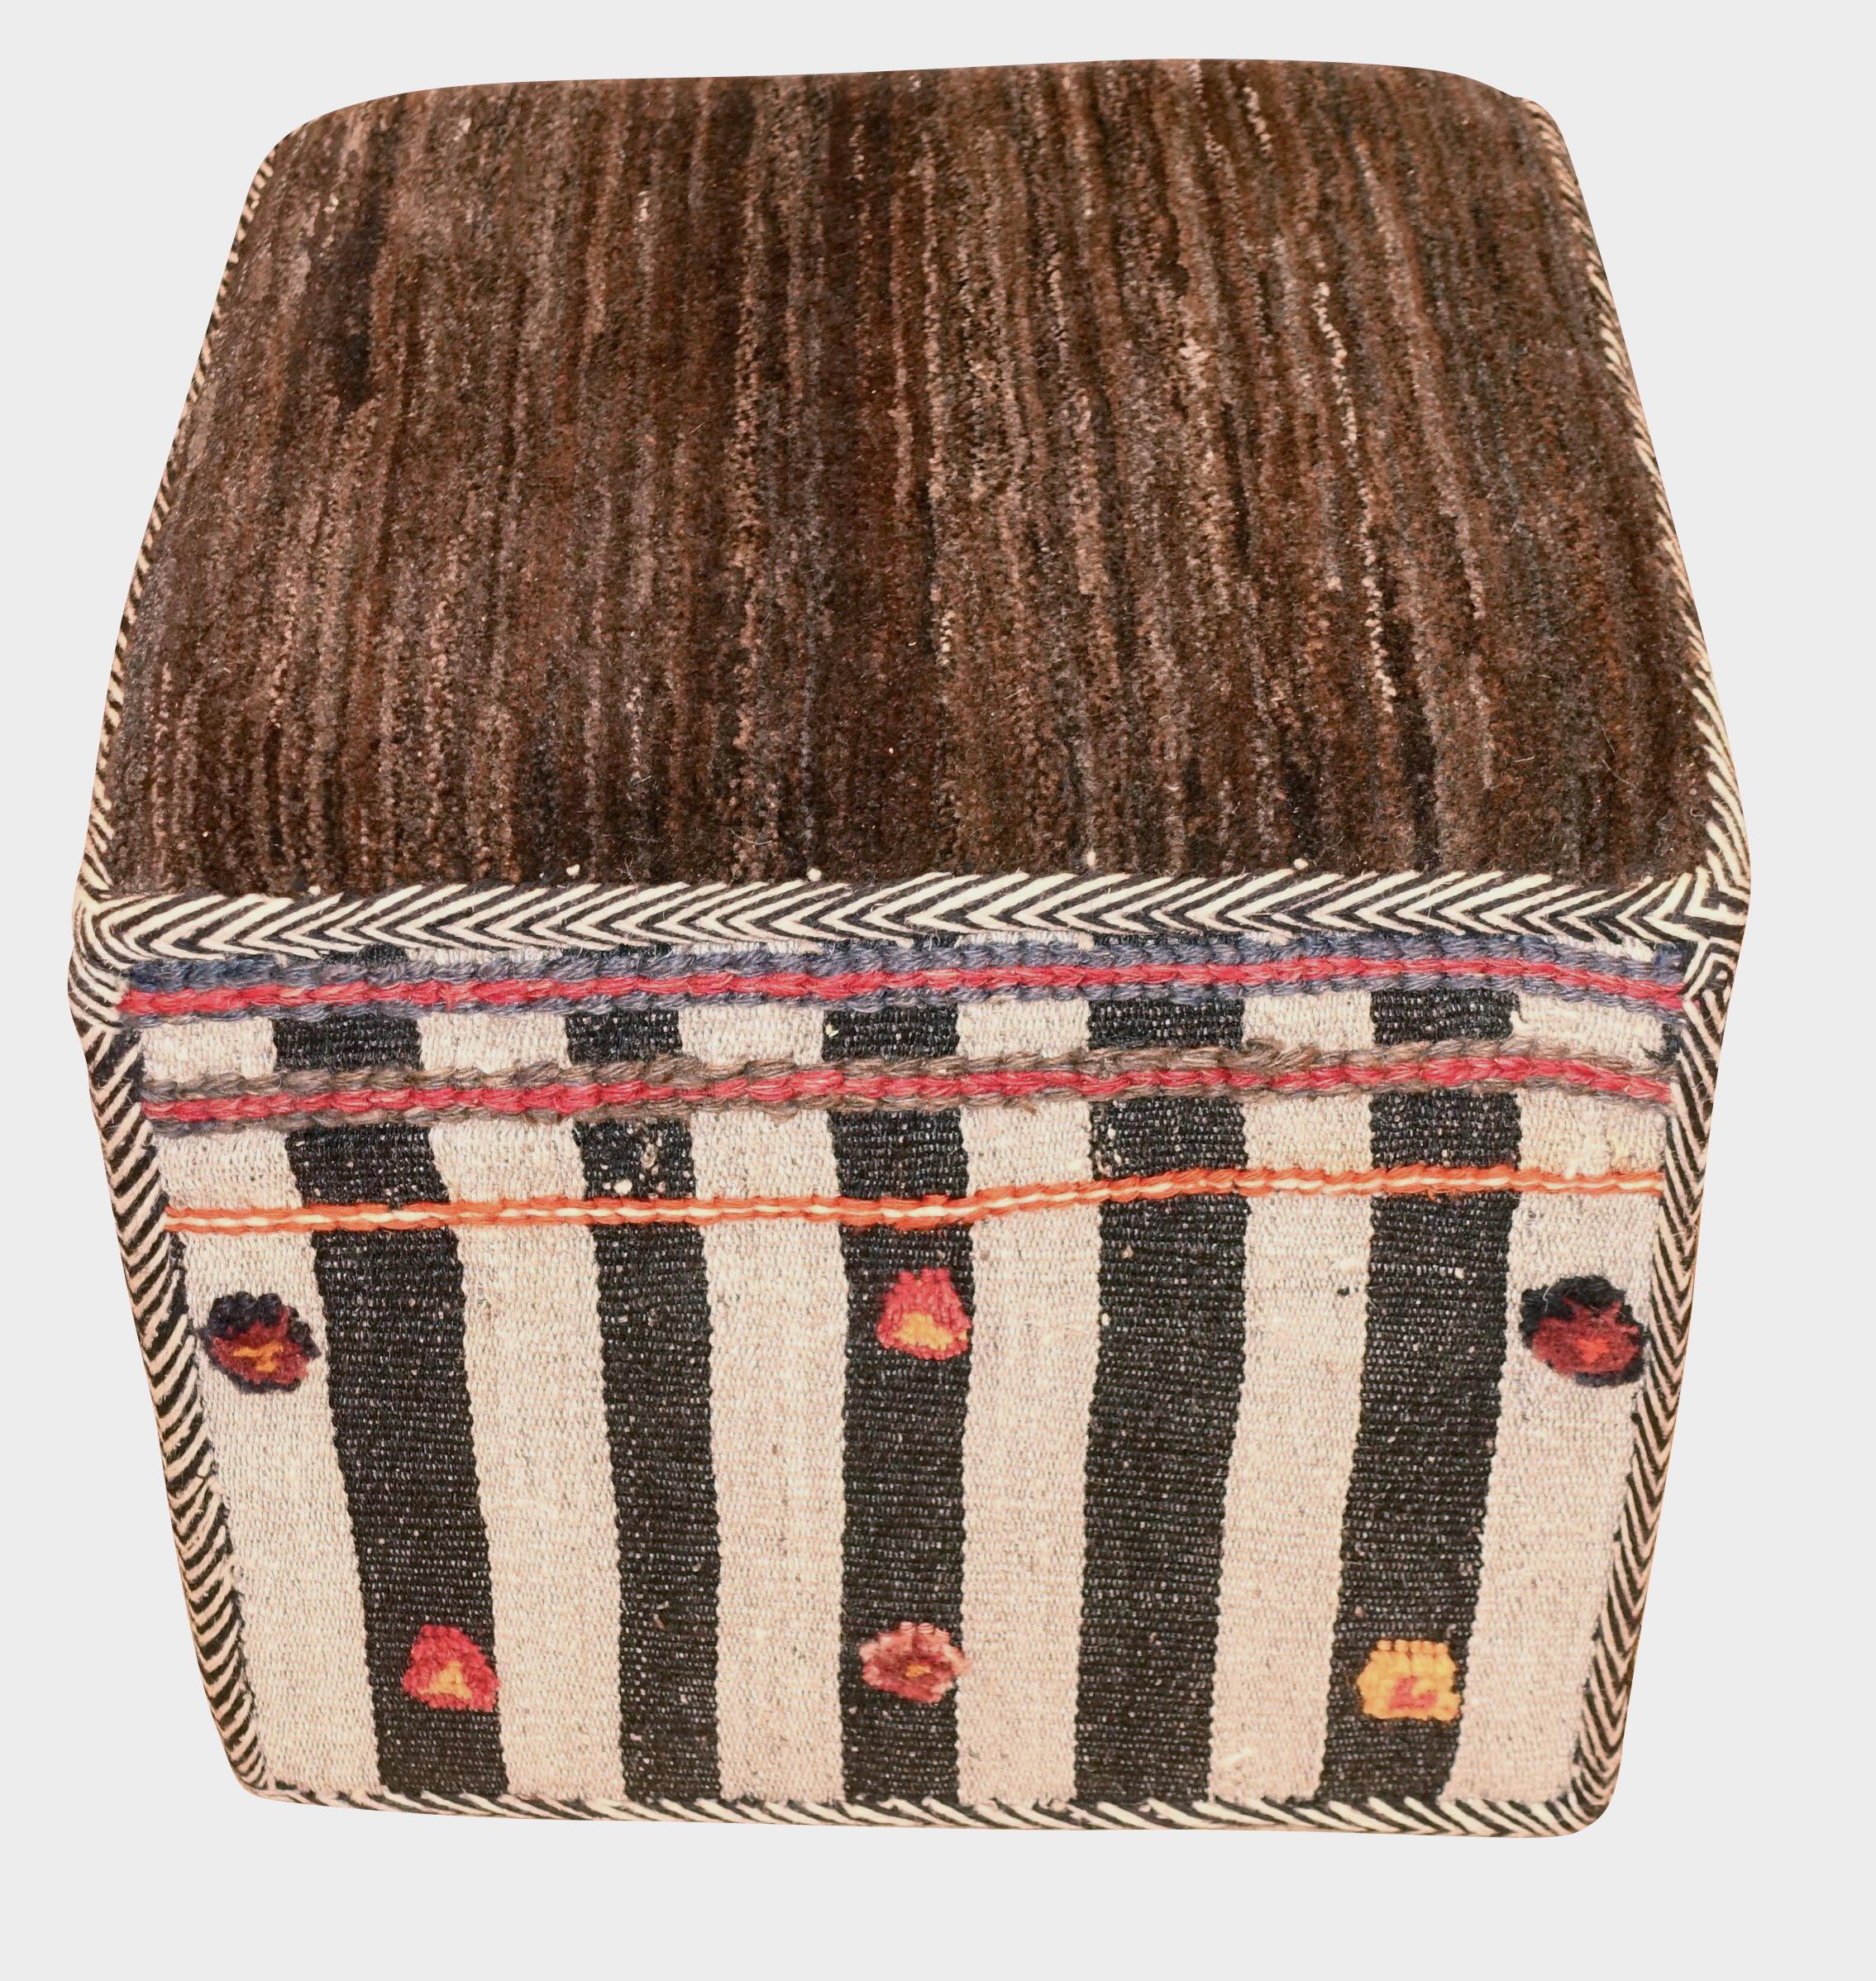 Unknown Decorative Kilim Footstool, Middle East, Contemporary